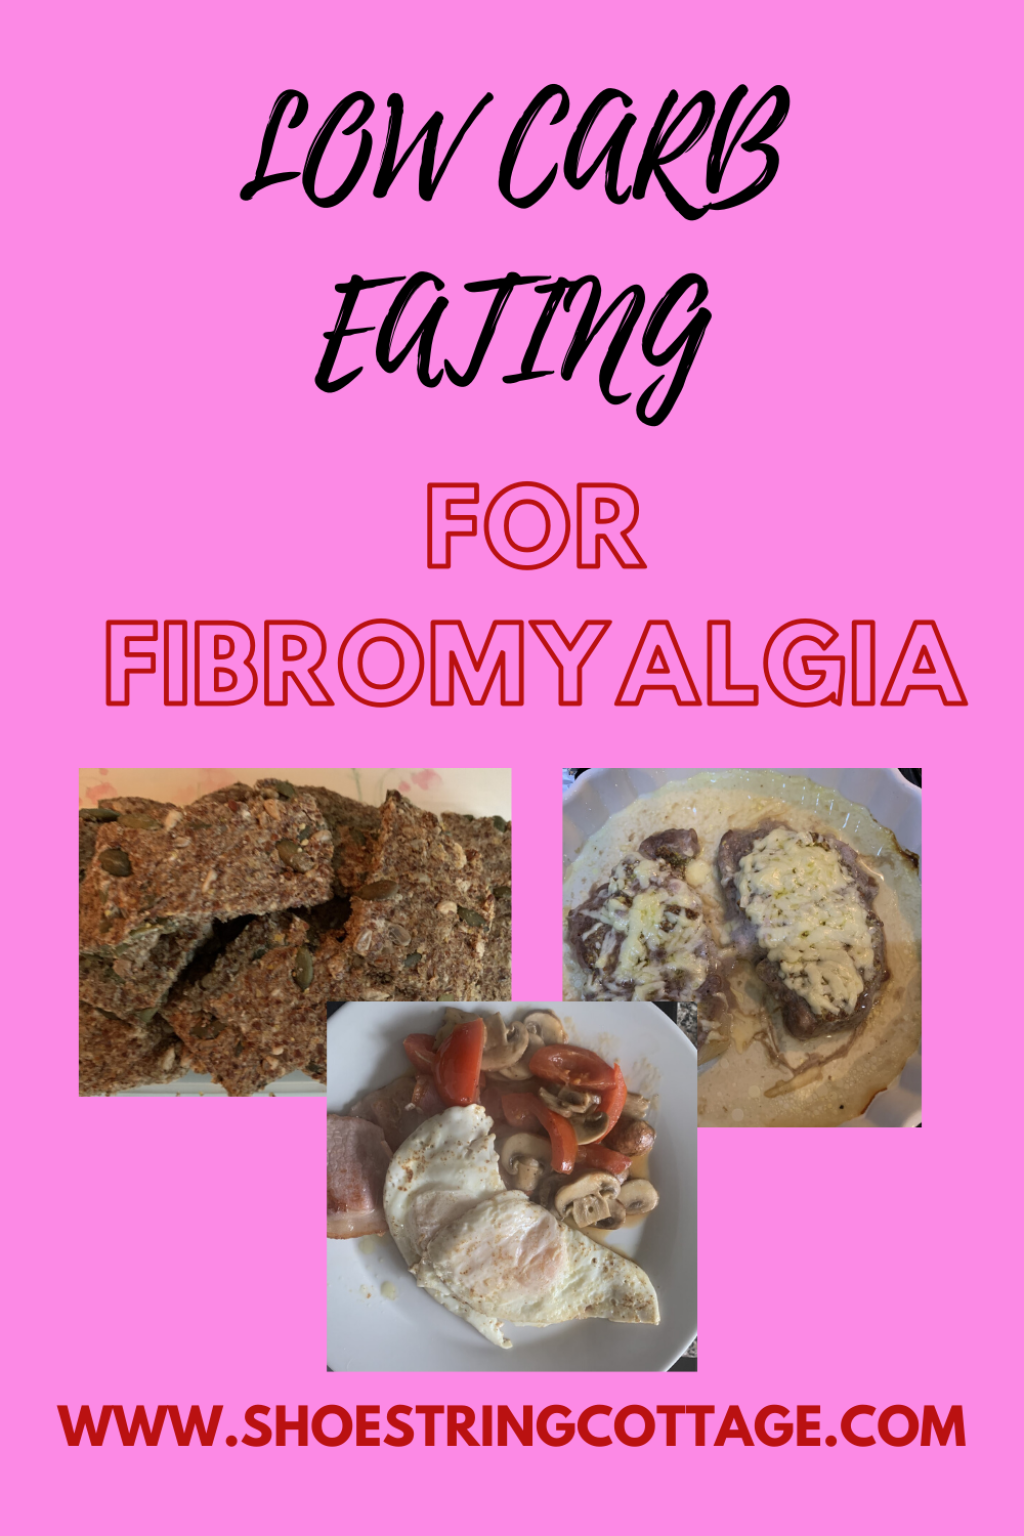 Picture of: Back to low carb eating for fibromyalgia – Shoestring Cottage